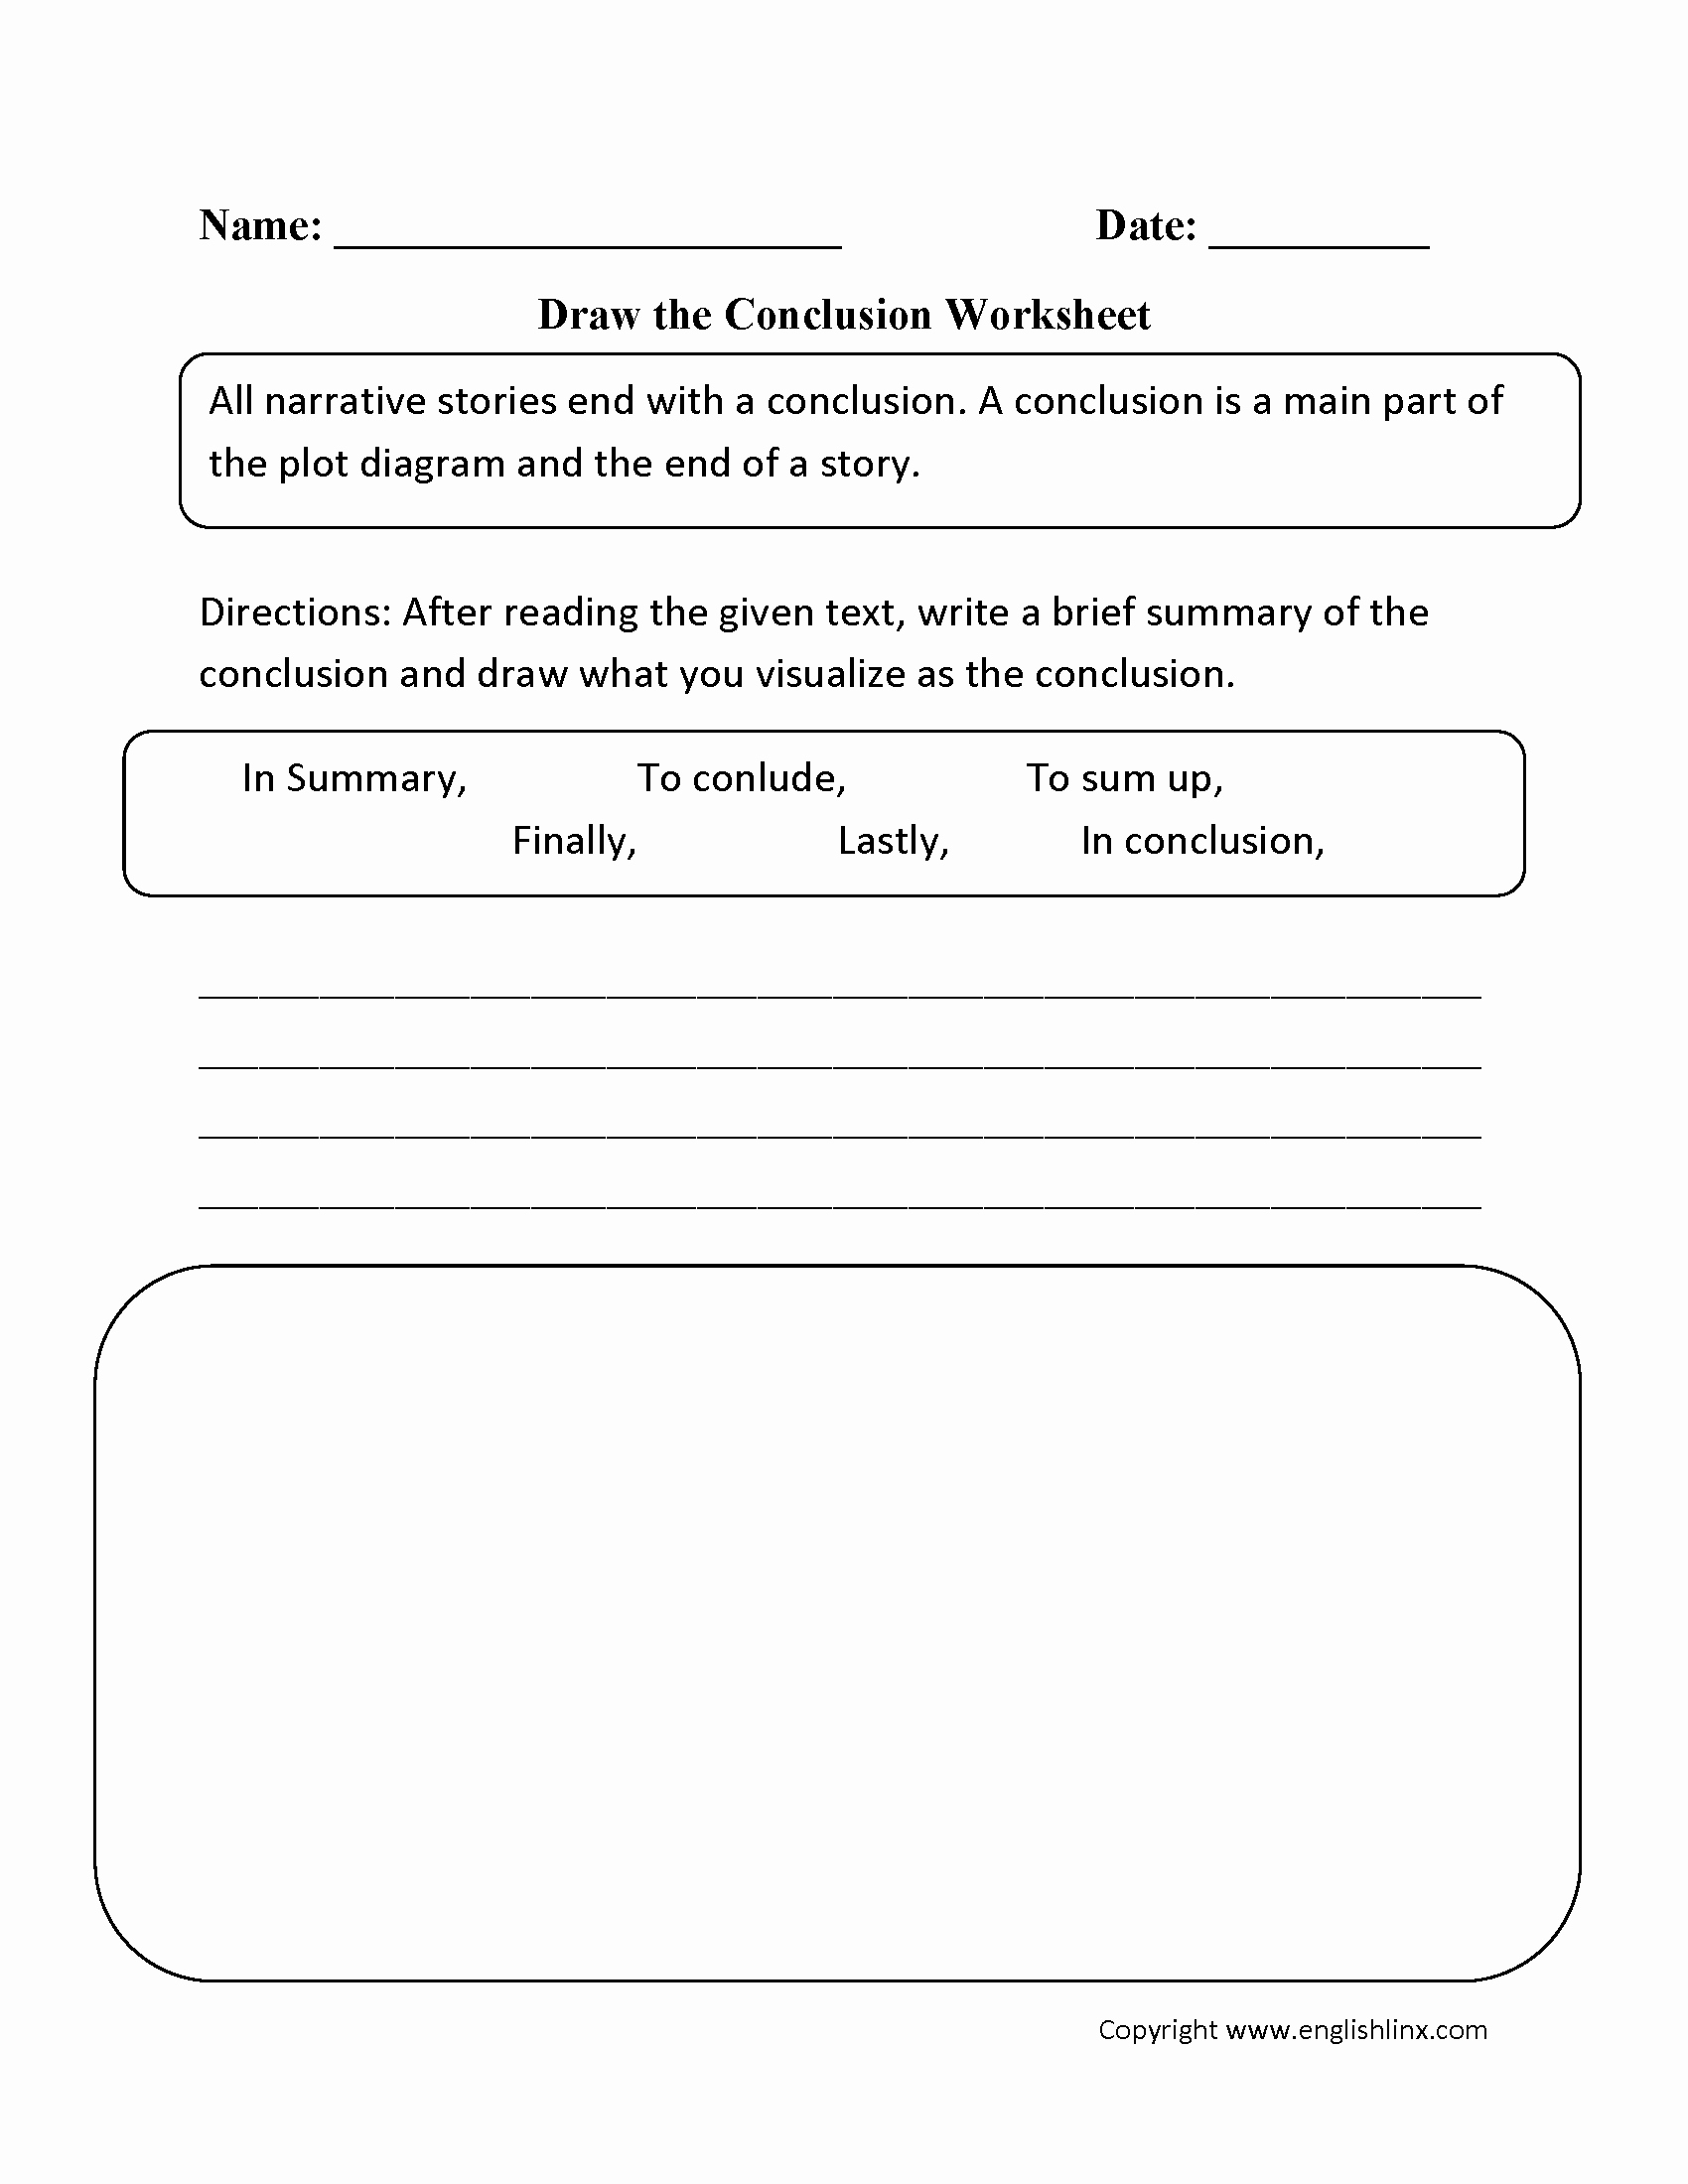 Making Conclusions Geometry Worksheet Answers Awesome Drawing Conclusions and Making Inferences Worksheets the